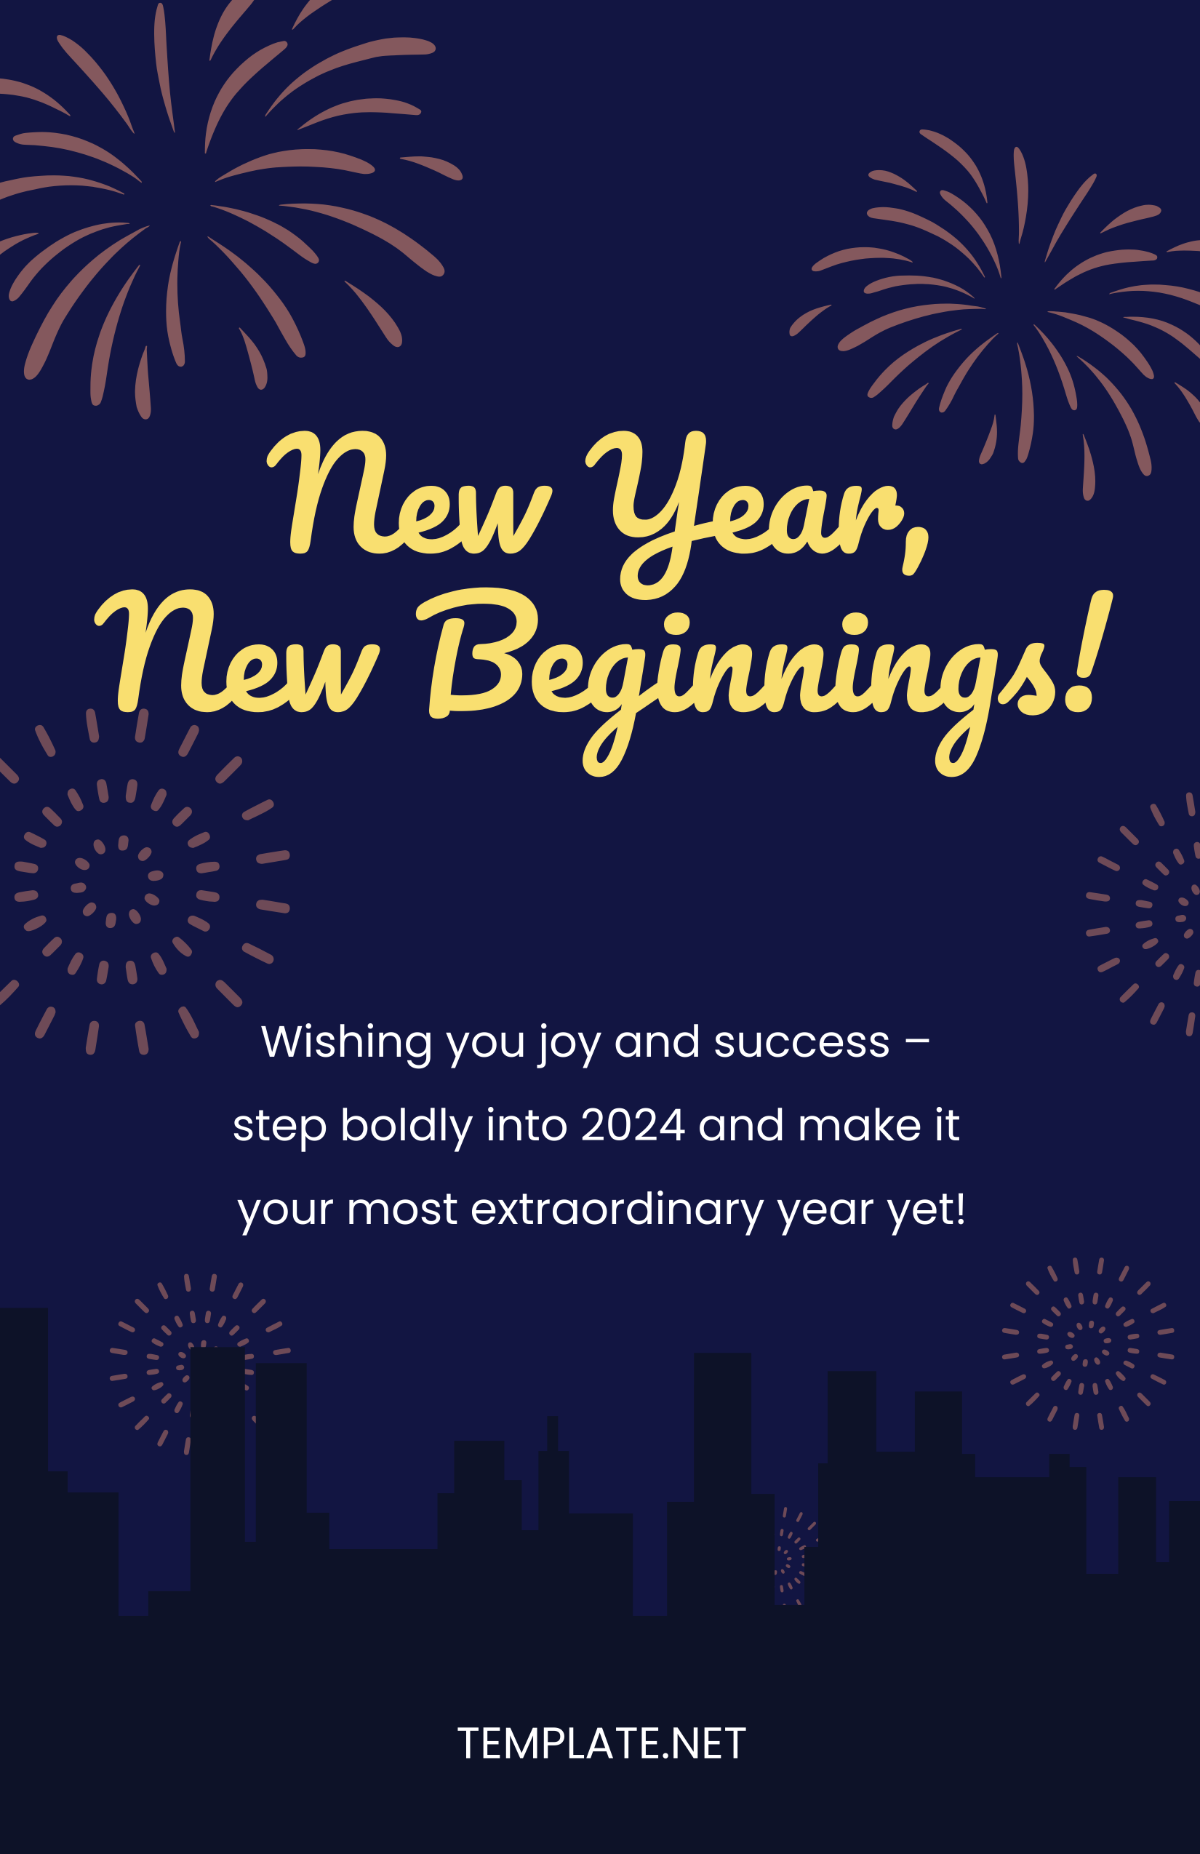 New Year Greetings Poster Template